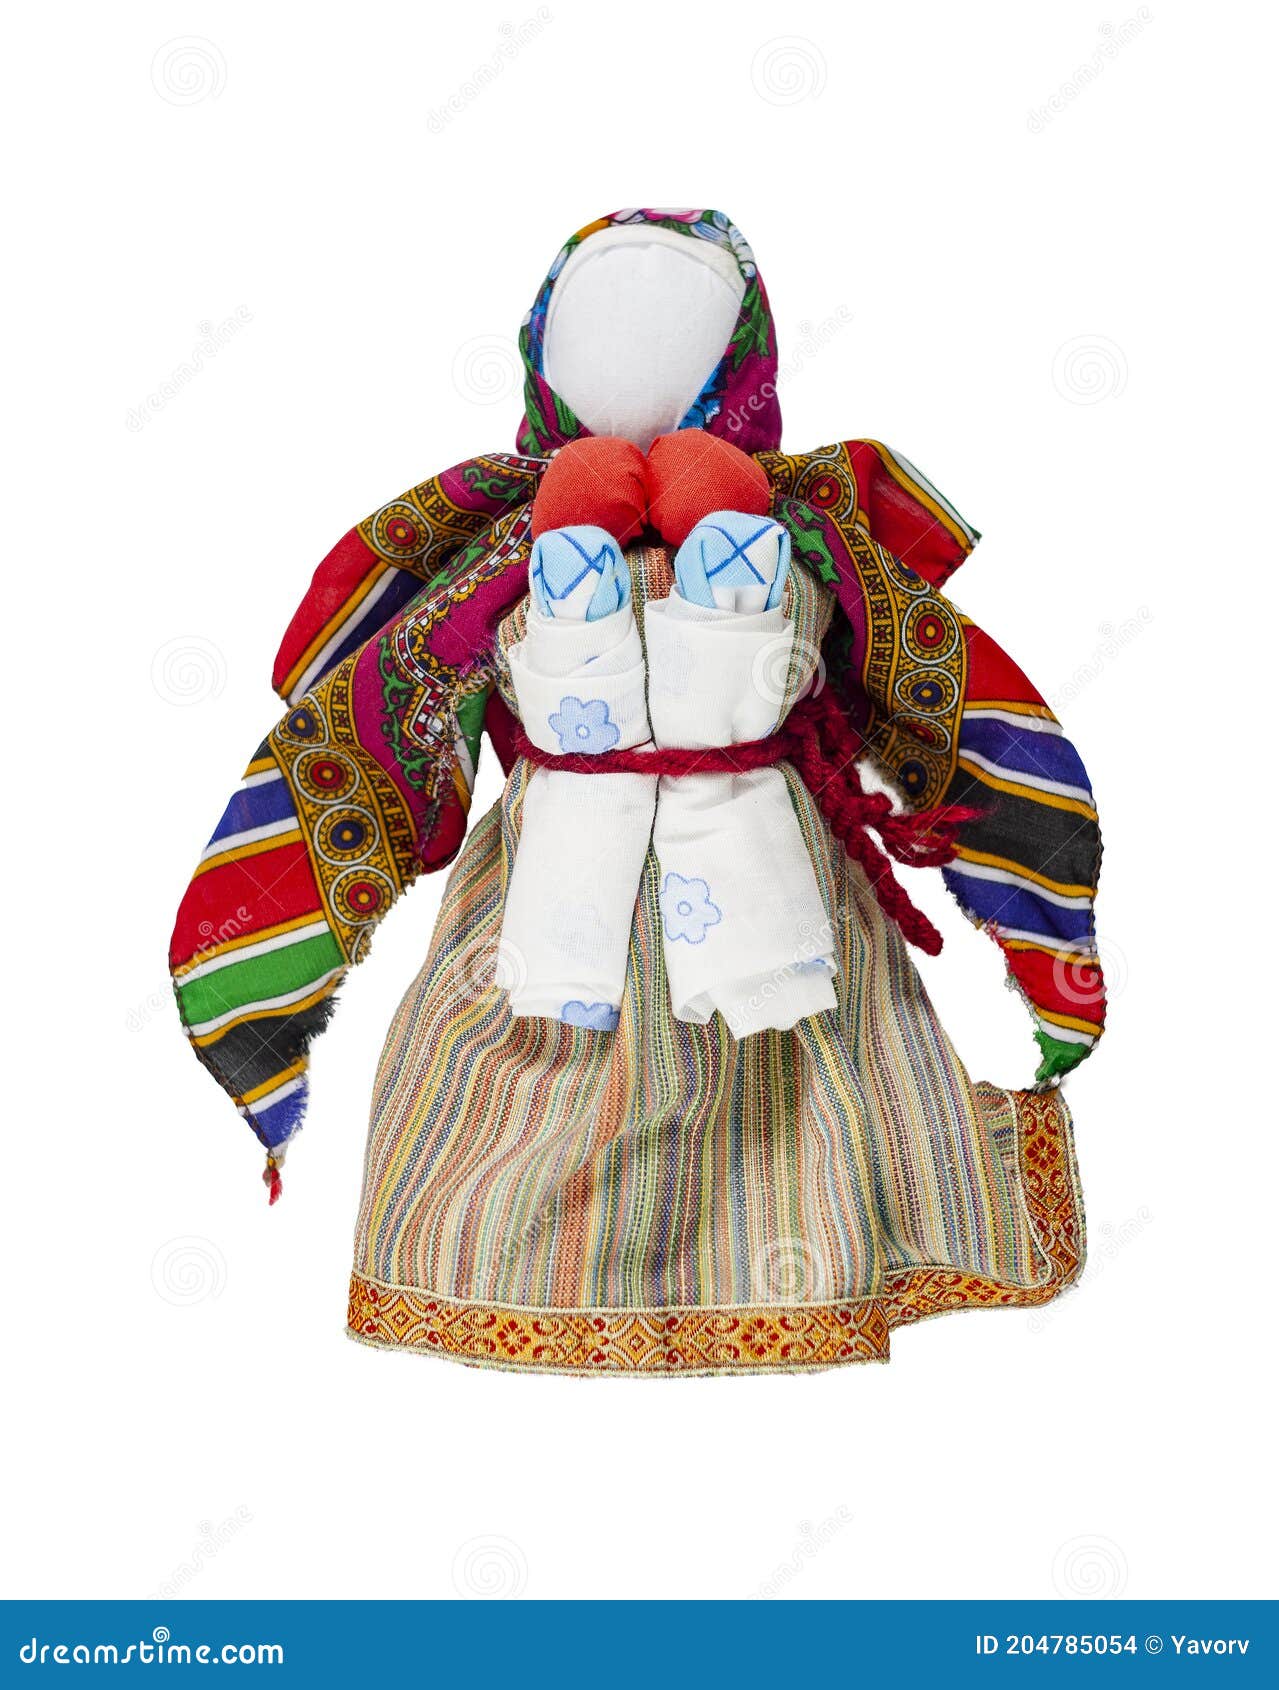 Handmade Textile Bride Doll Russian Slavic Amulet for Rich and Happy Marriage 